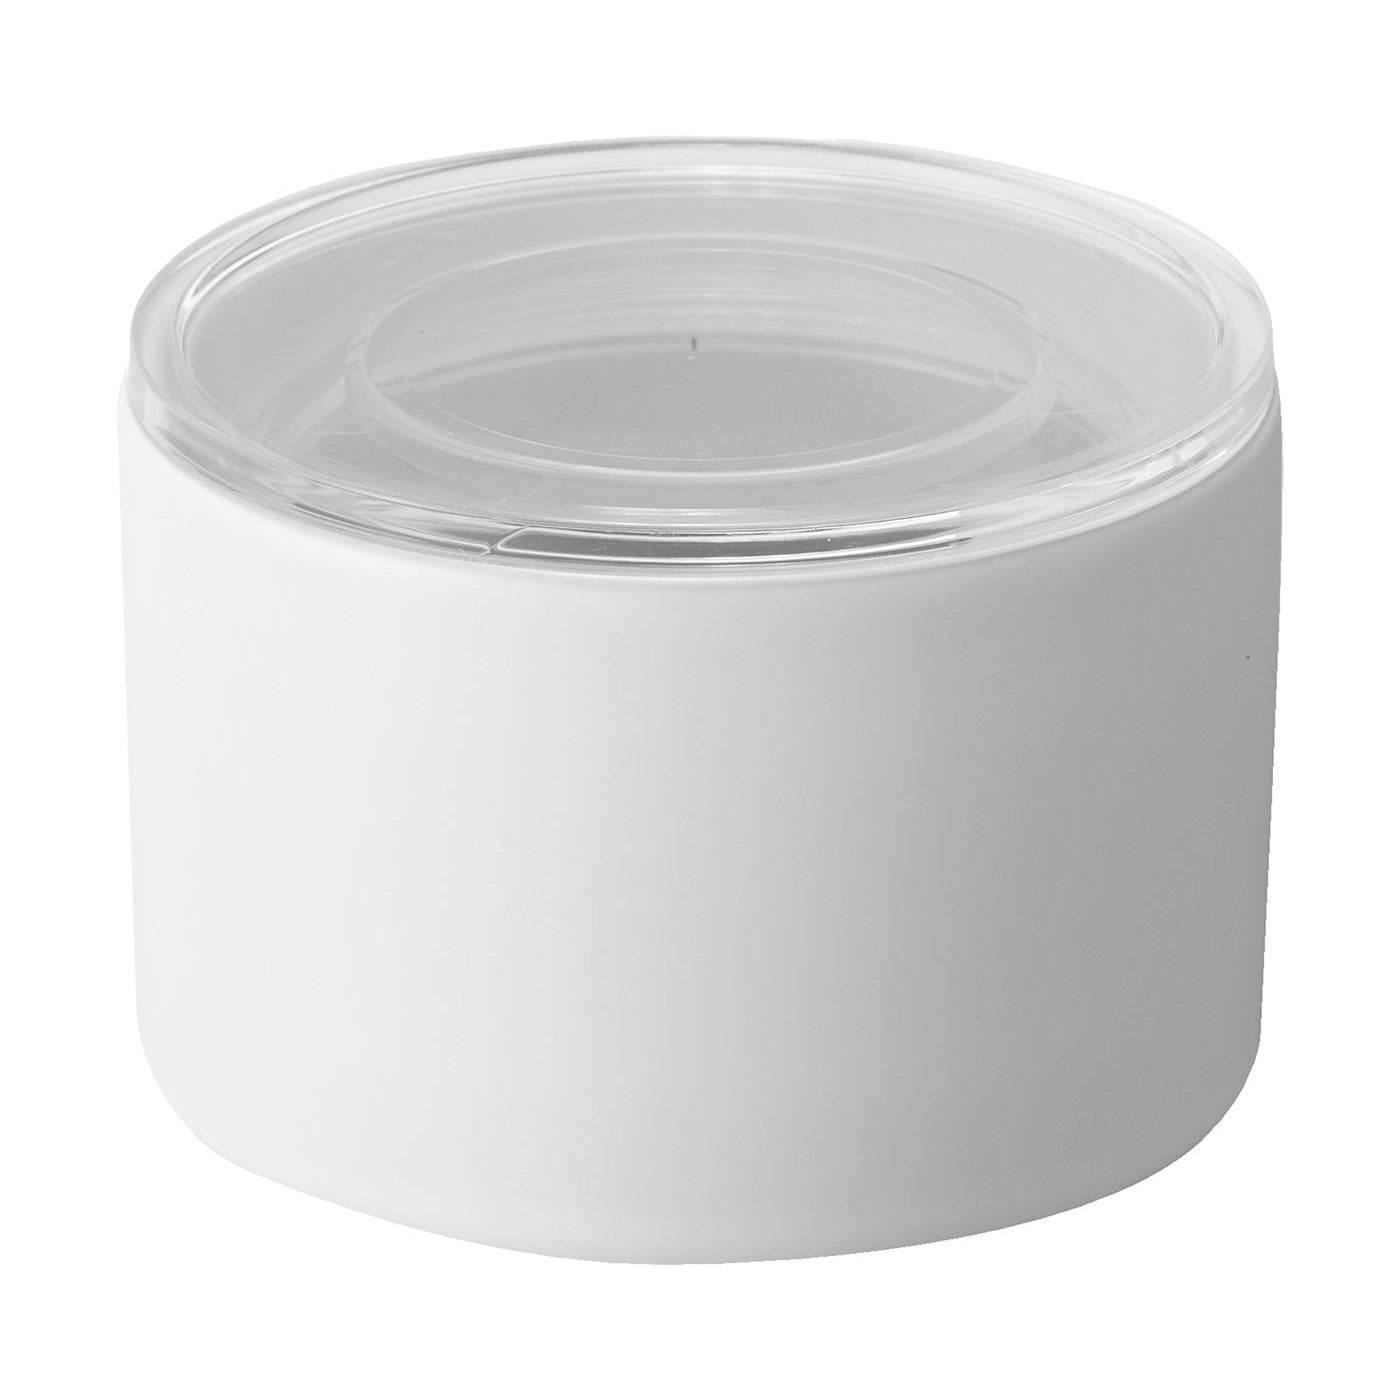 Ceramic-Canister-Two-Sizes-Food-Storage